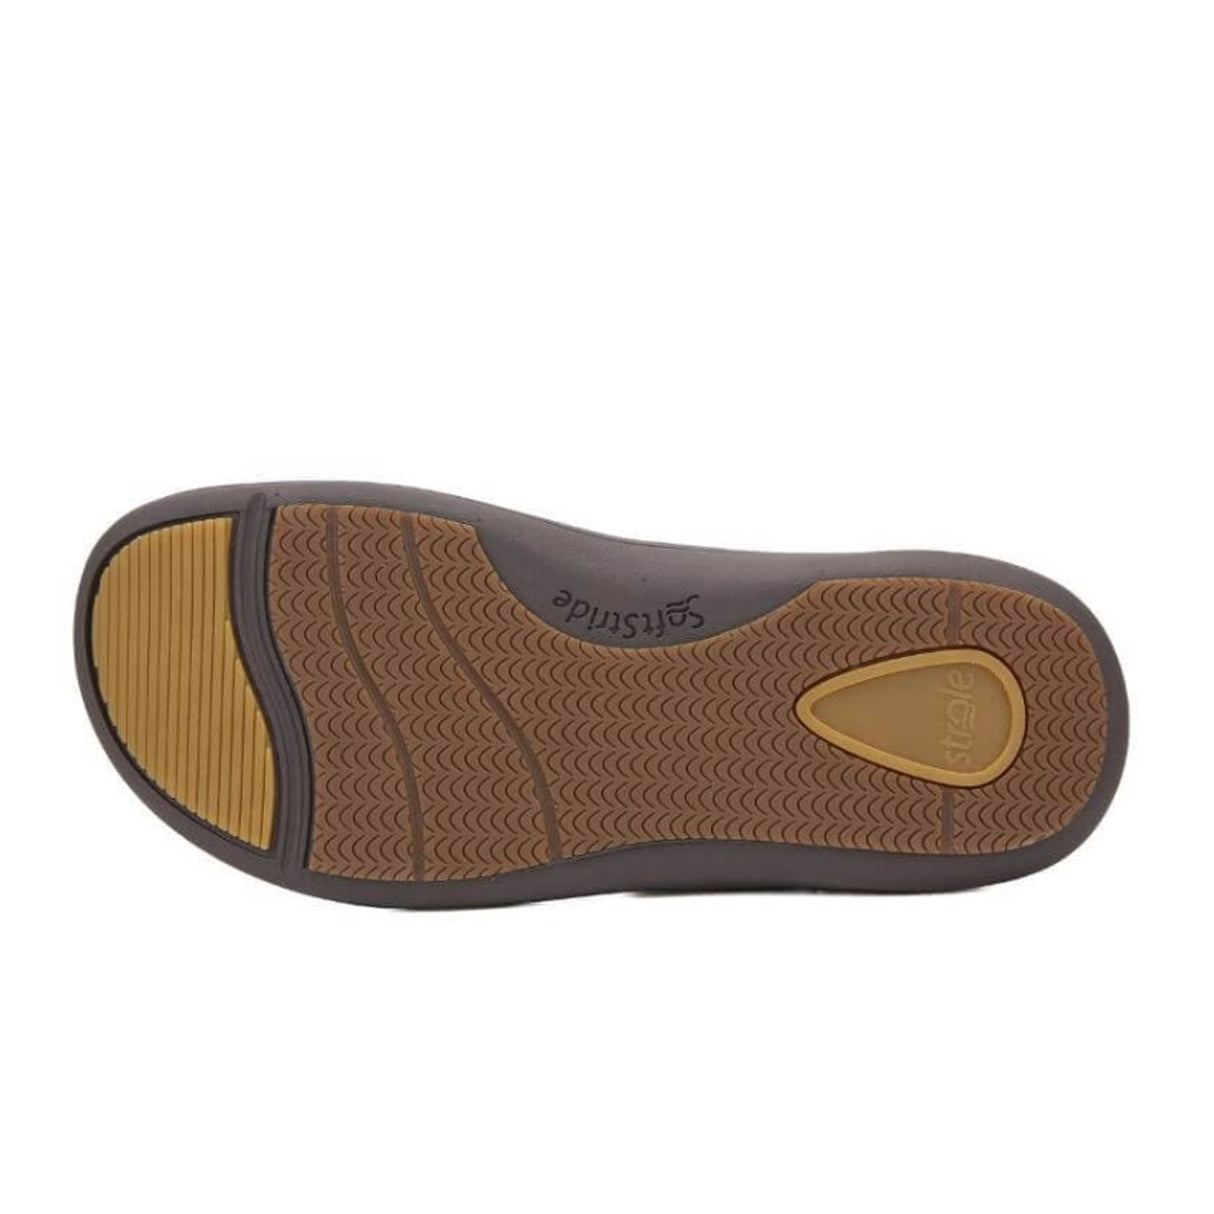 Strole Vibe Thong Sandal (Men) - Dark Brown Sandals - Thong - The Heel Shoe Fitters